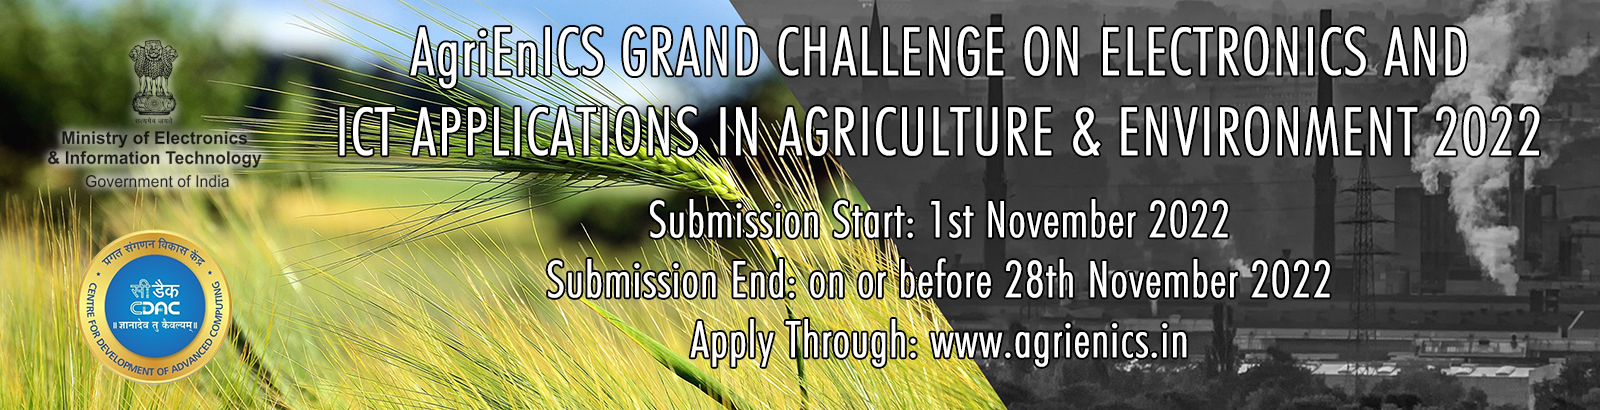 The AgriEnIcs Grand Challenge proposals are under evaluation.